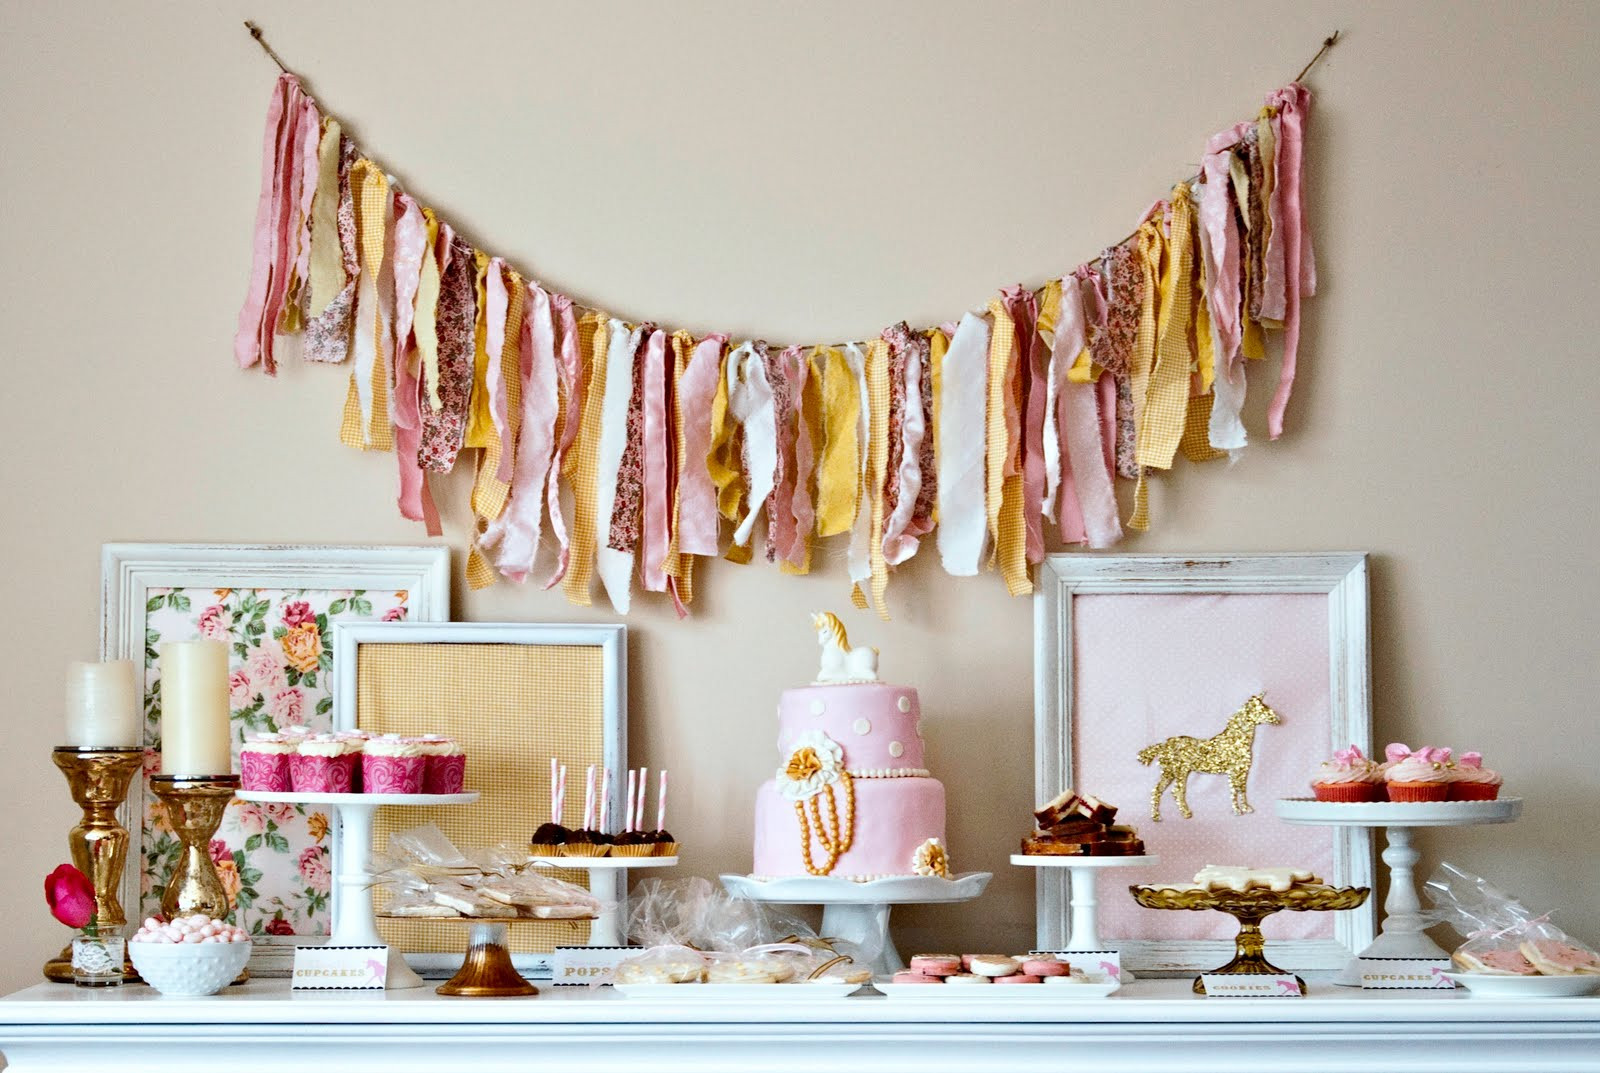 Unicorn Theme Tea Party Food Ideas For Girls
 Candy and Cake A Unicorn Themed Tea Party